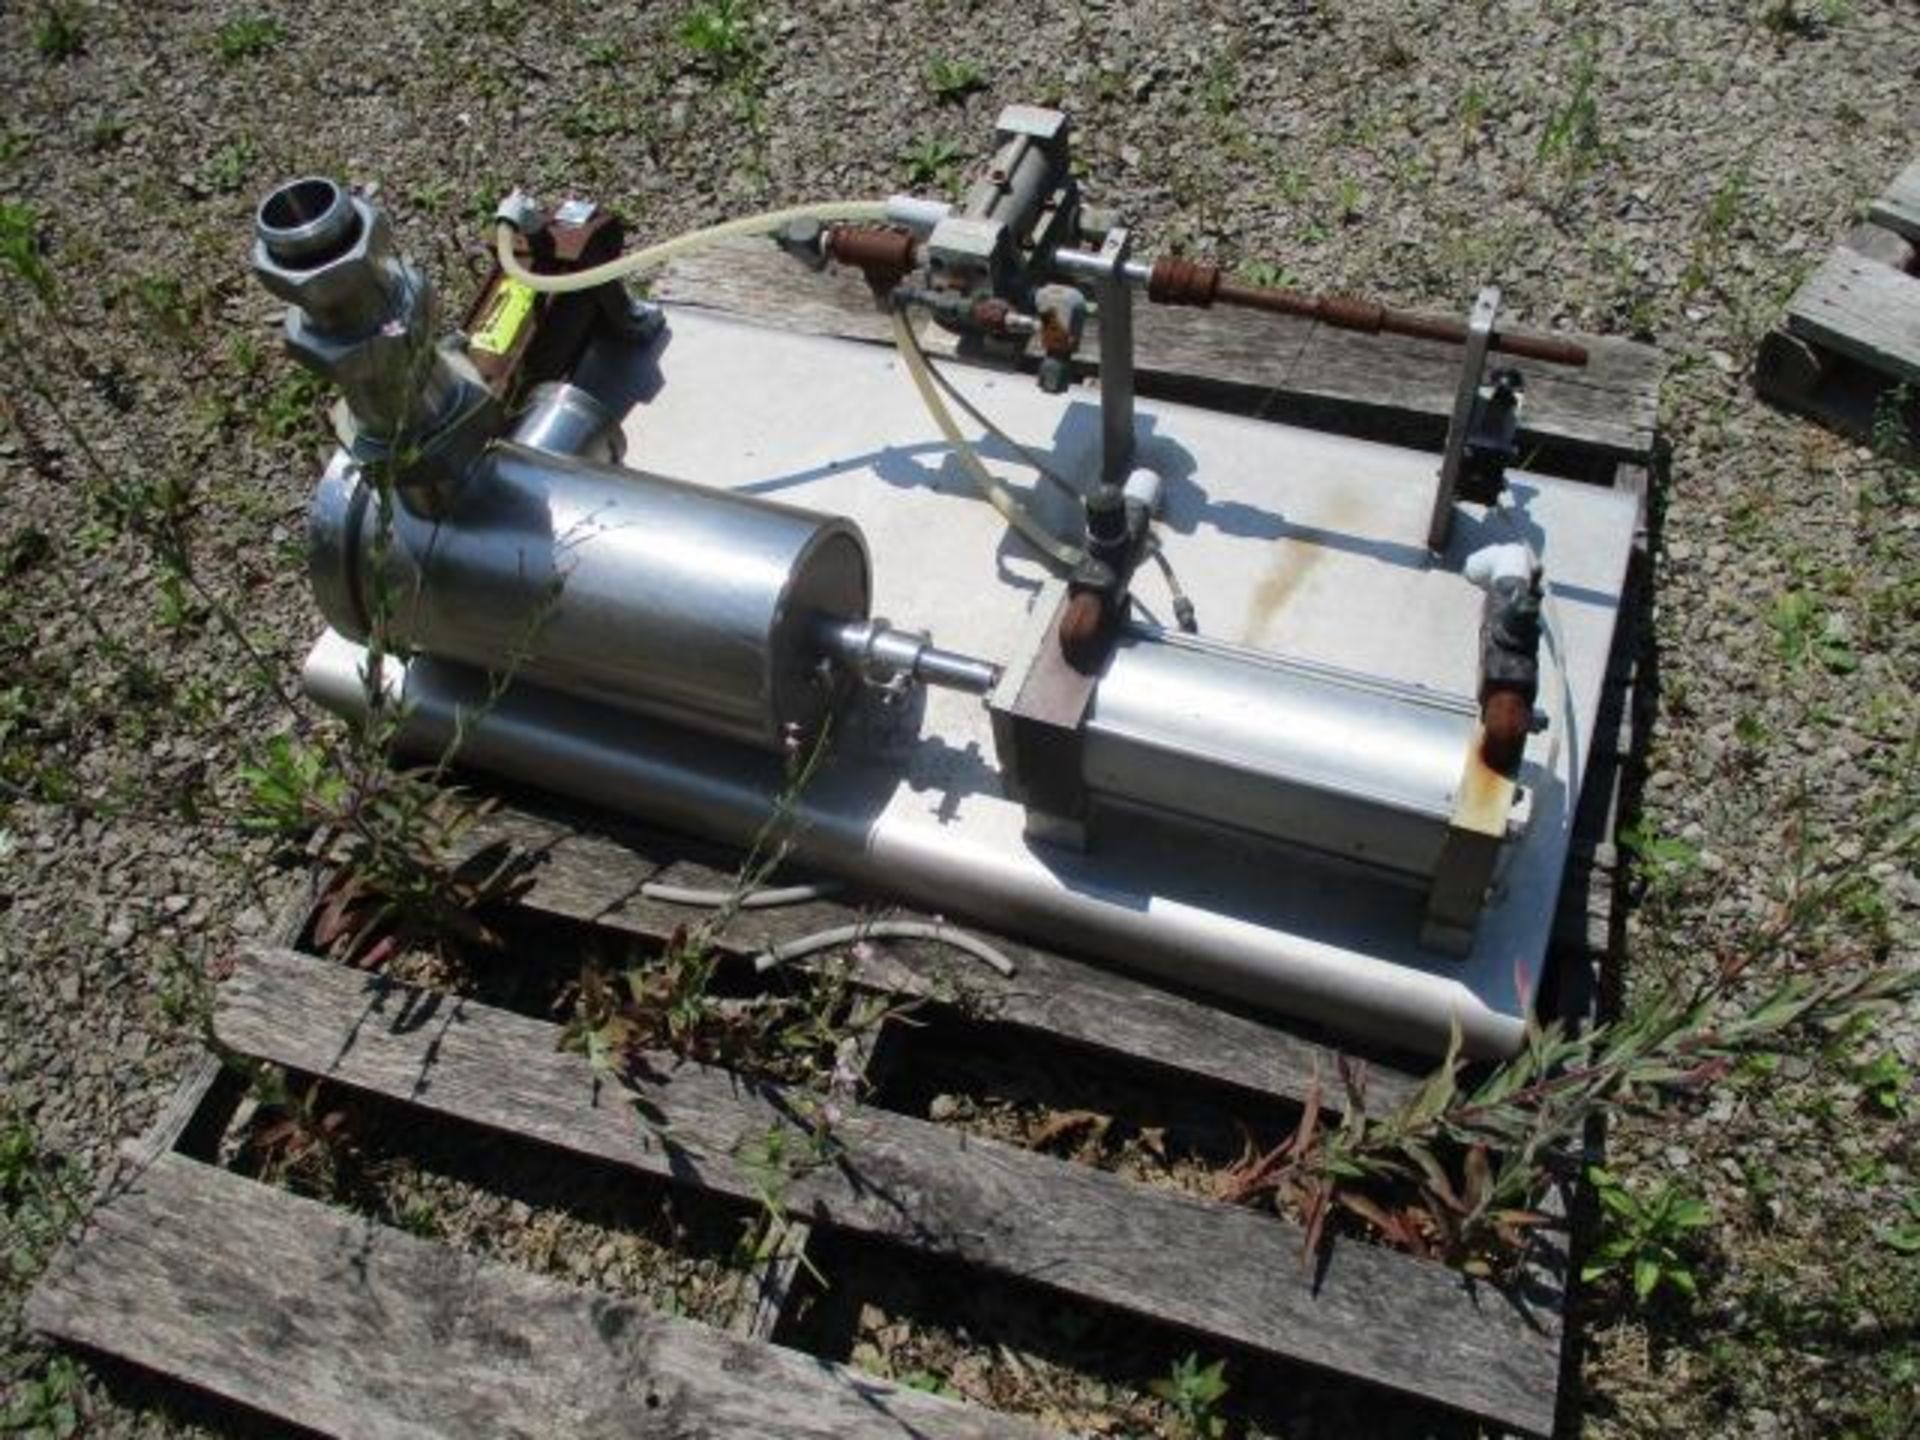 Stainless Steel Pnuematic Piston Pump, 6 in dia - Image 3 of 7